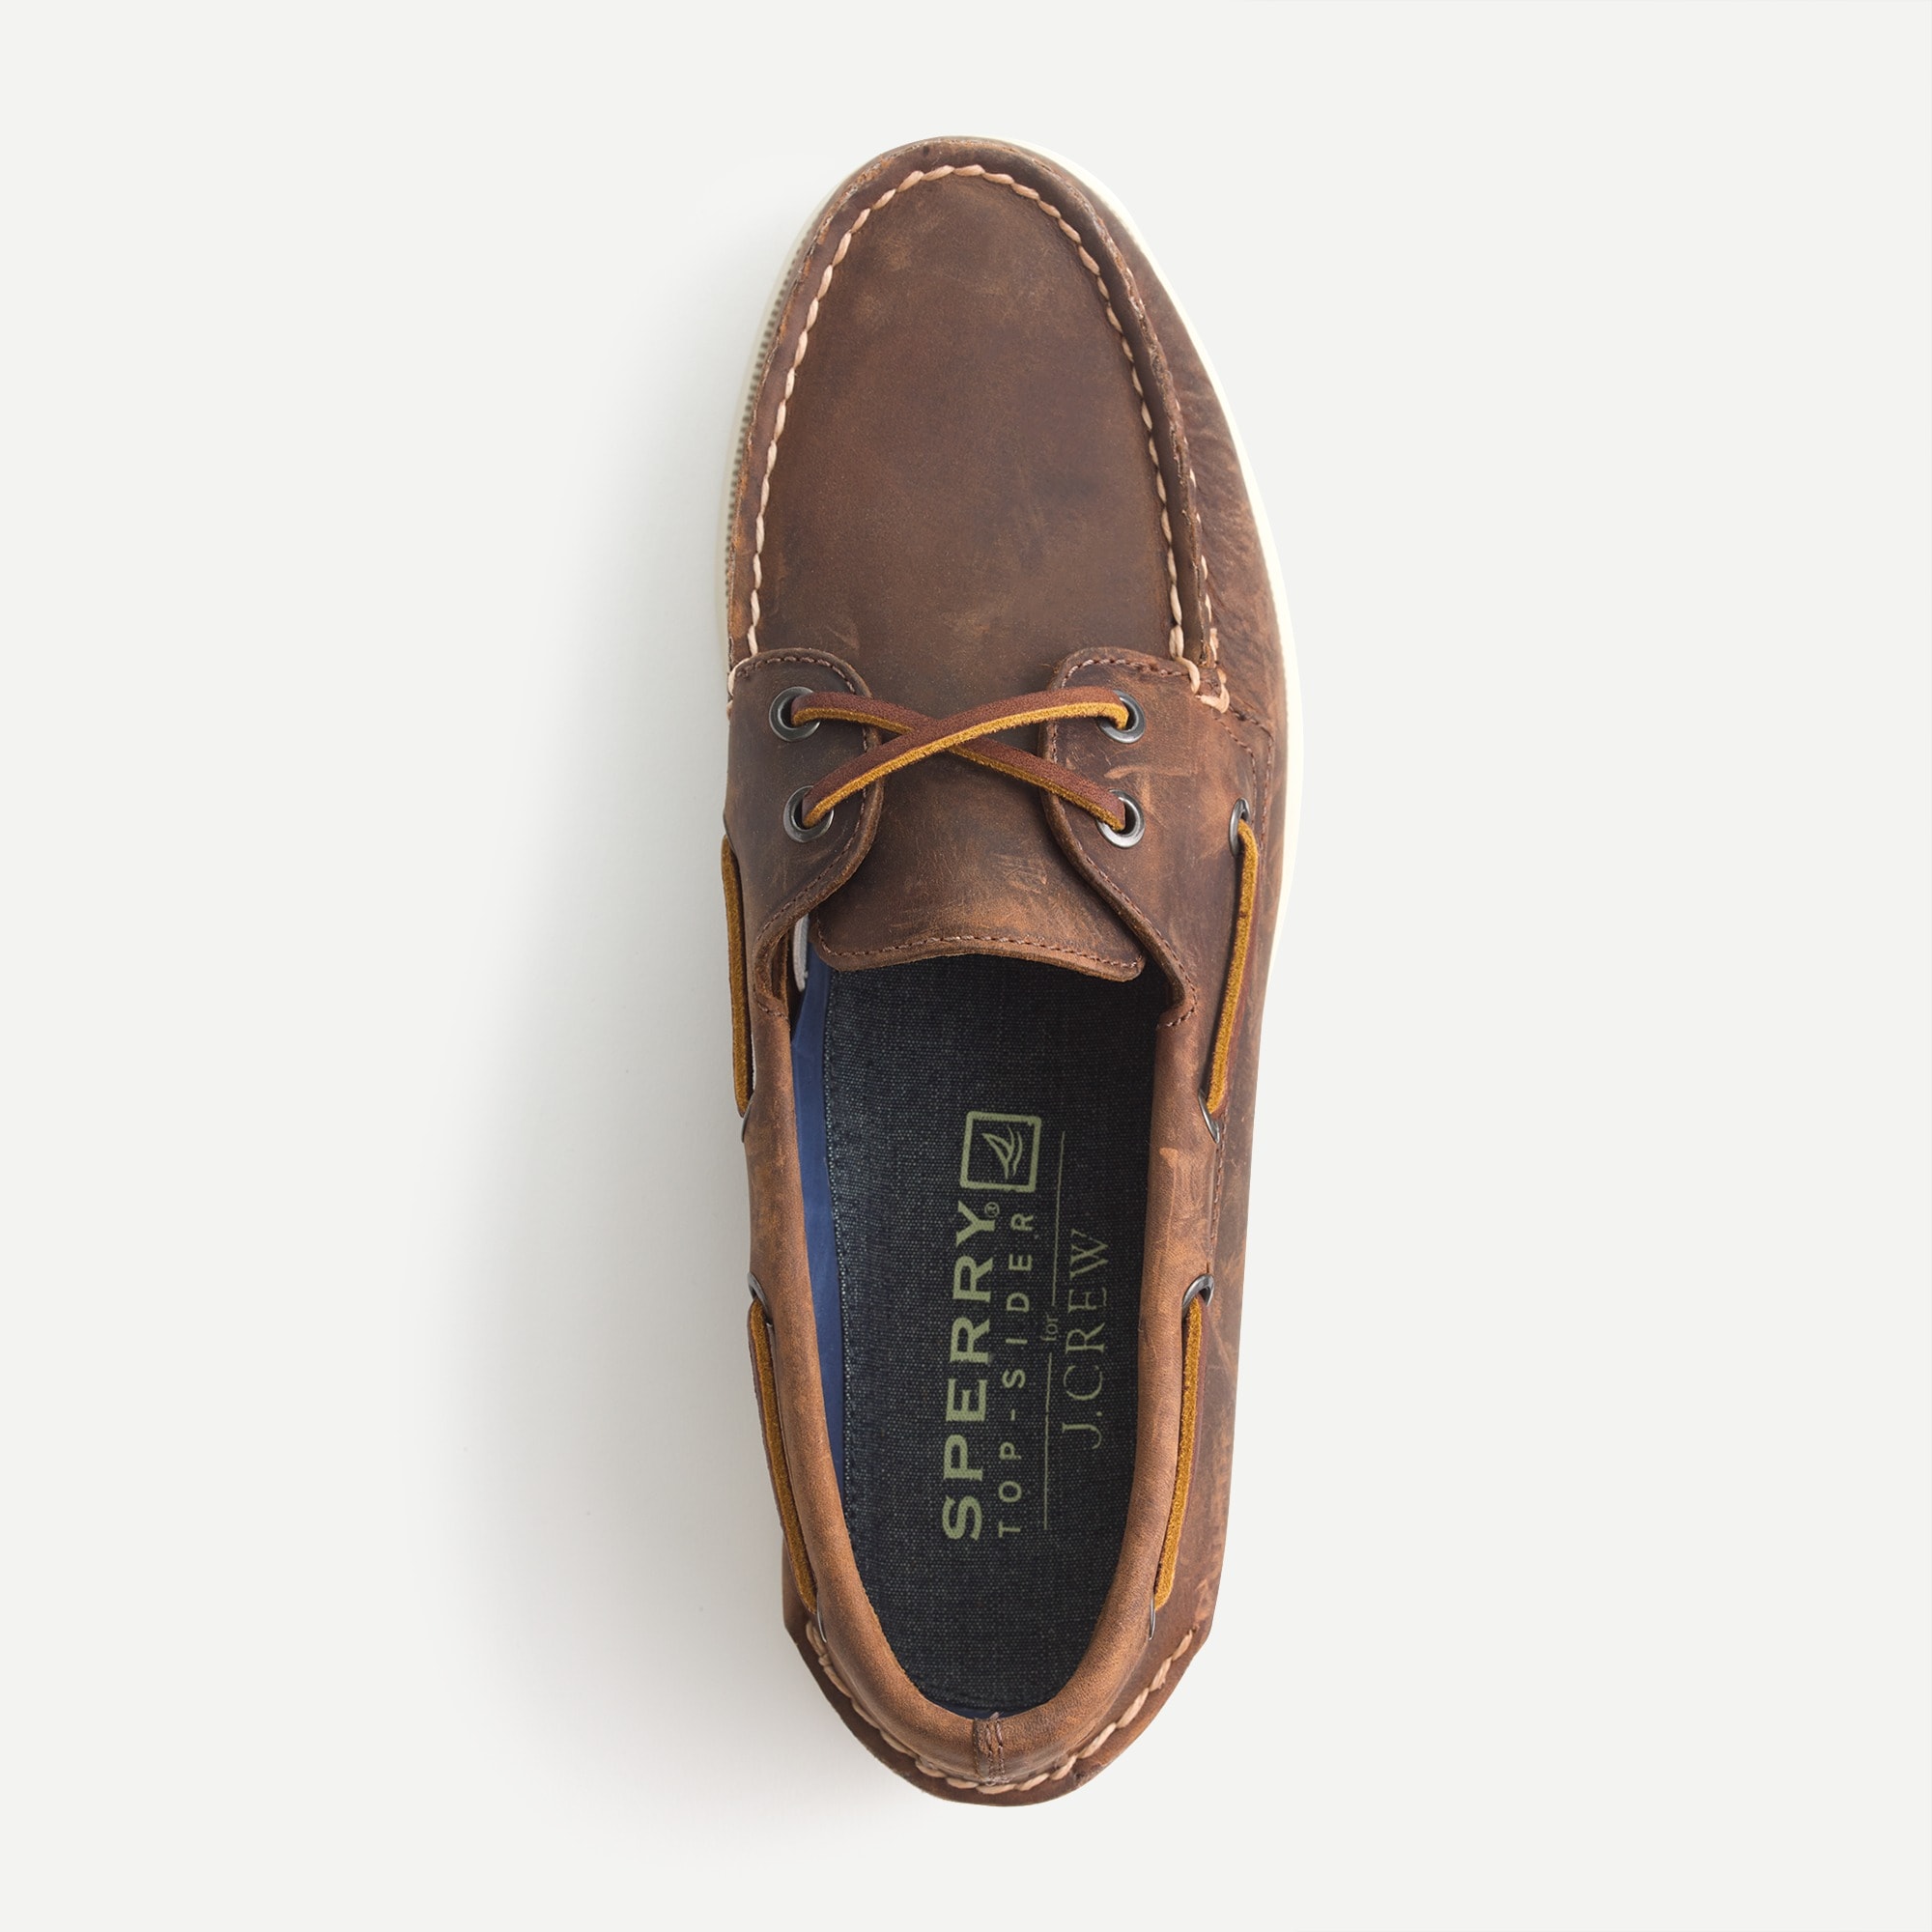 sperry top sider dress shoes